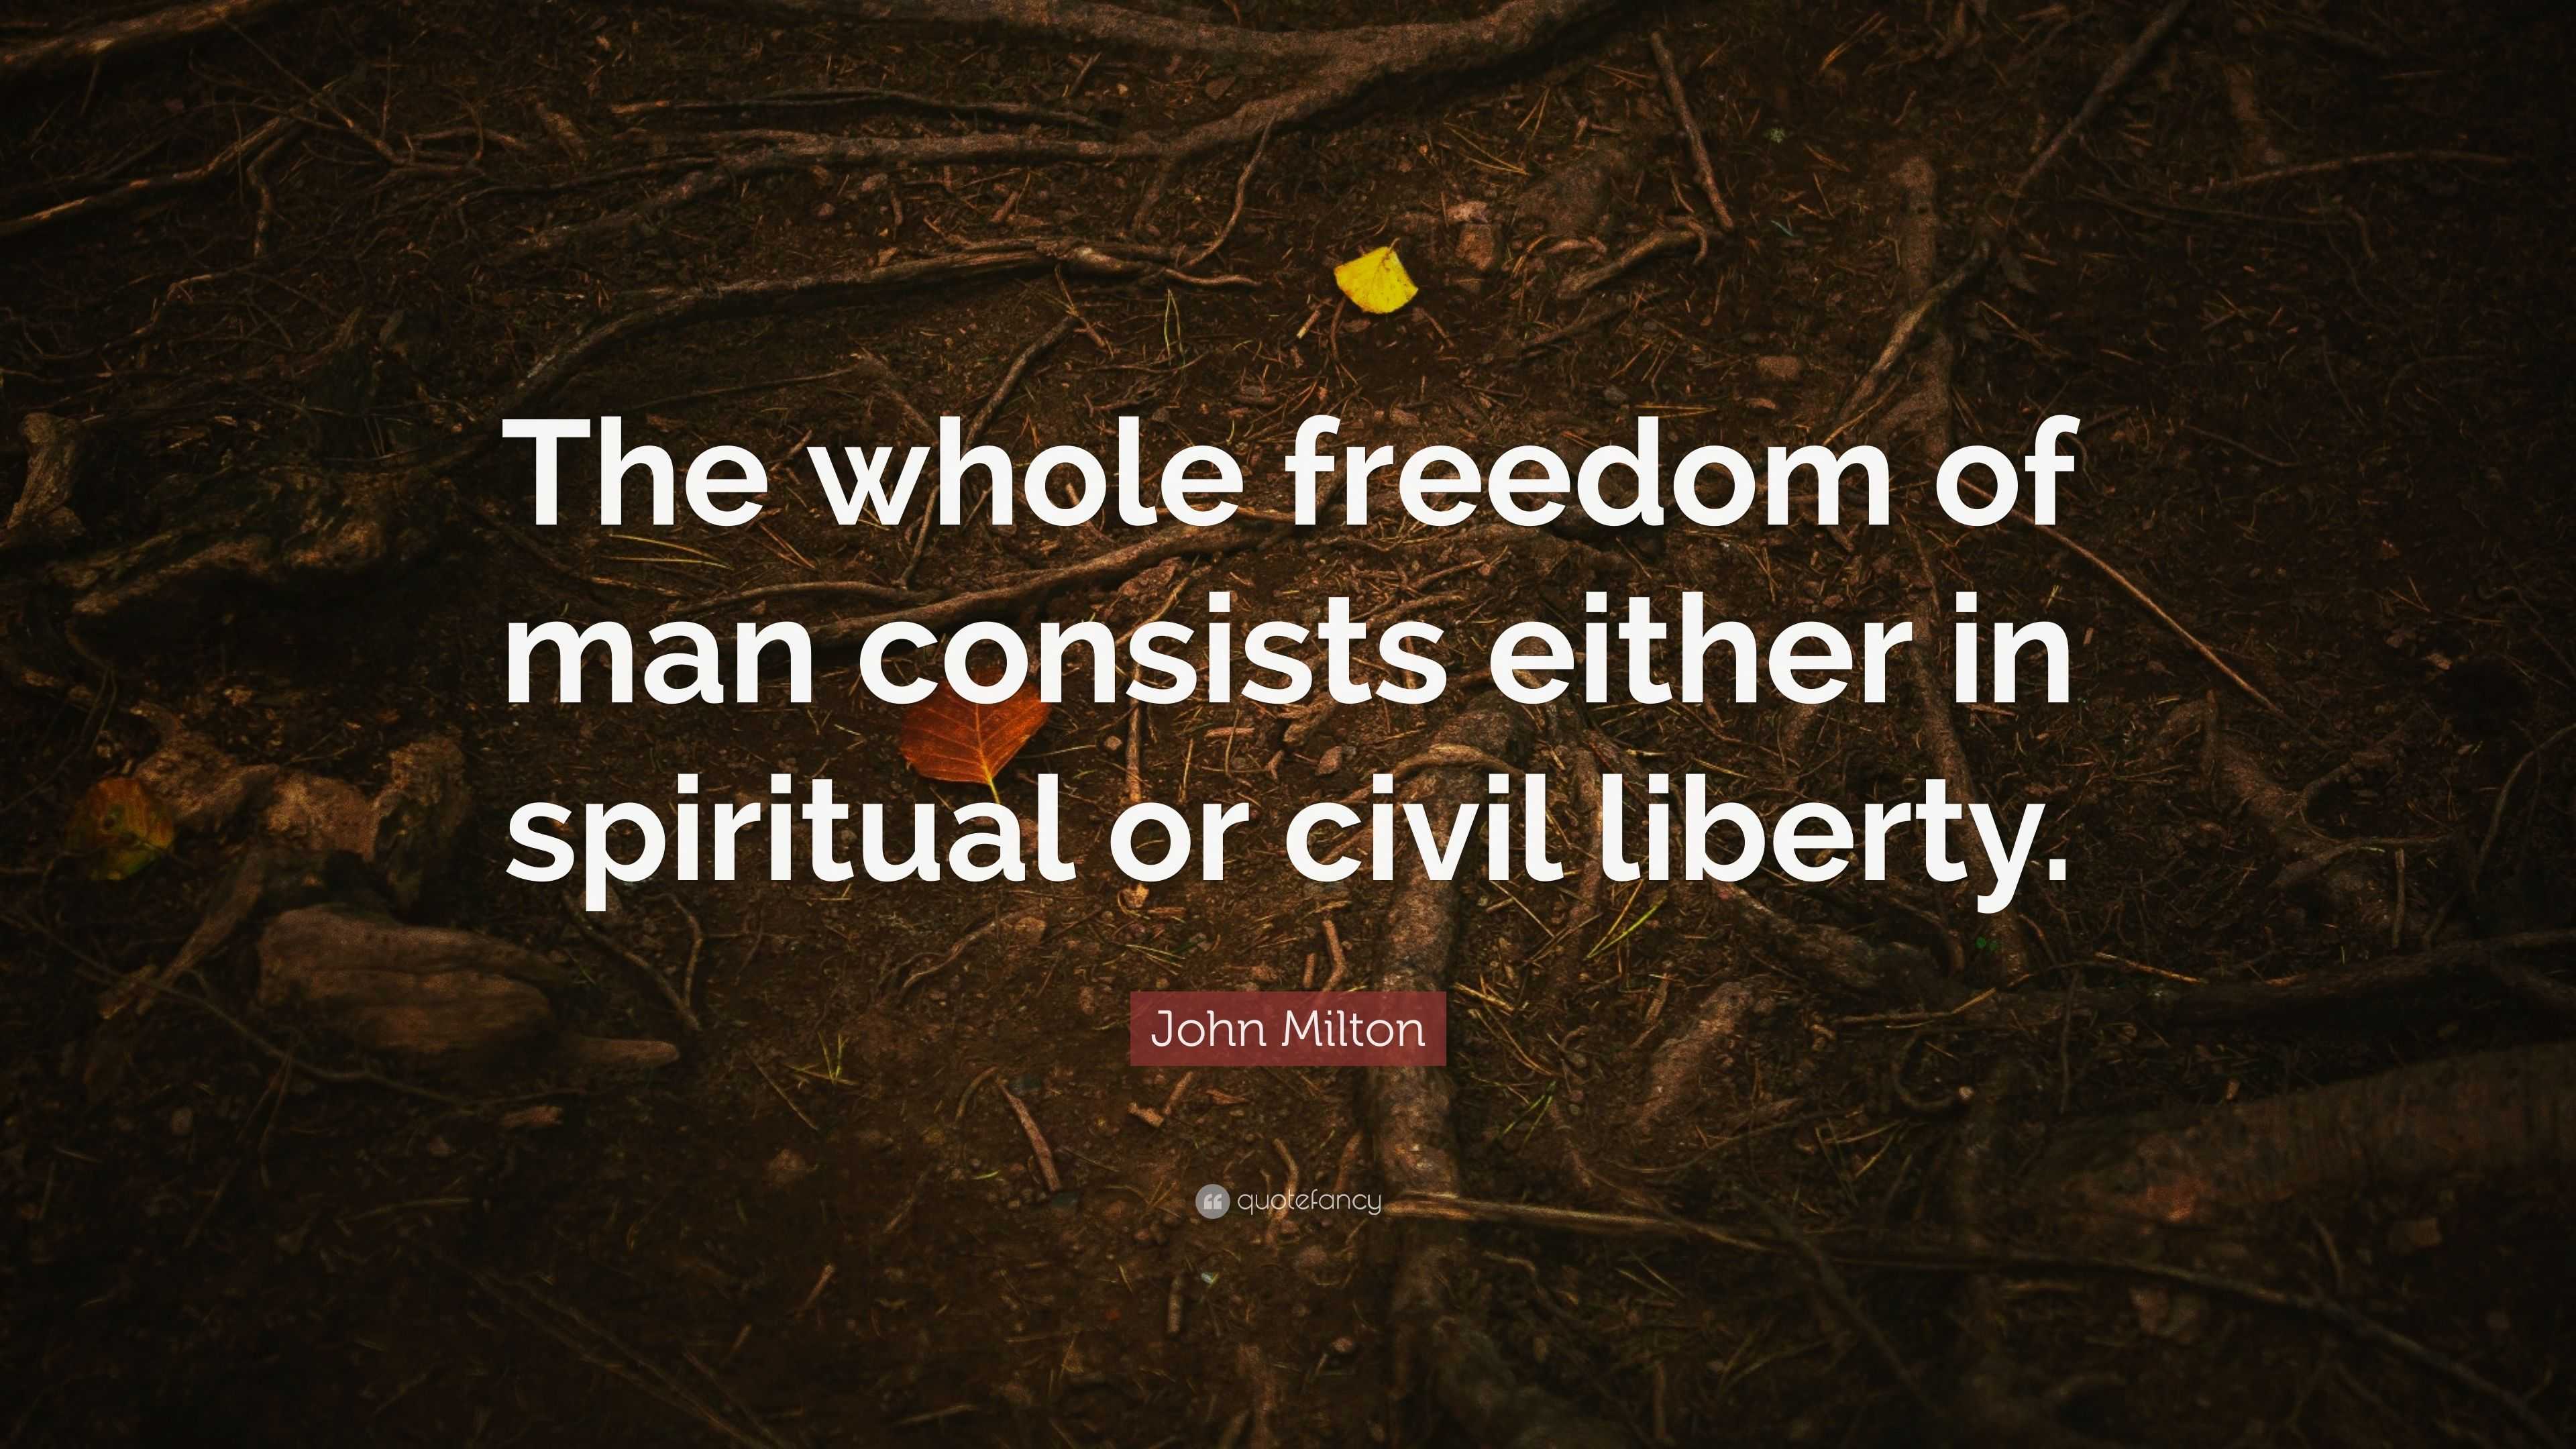 John Milton Quote: “The whole freedom of man consists either in ...